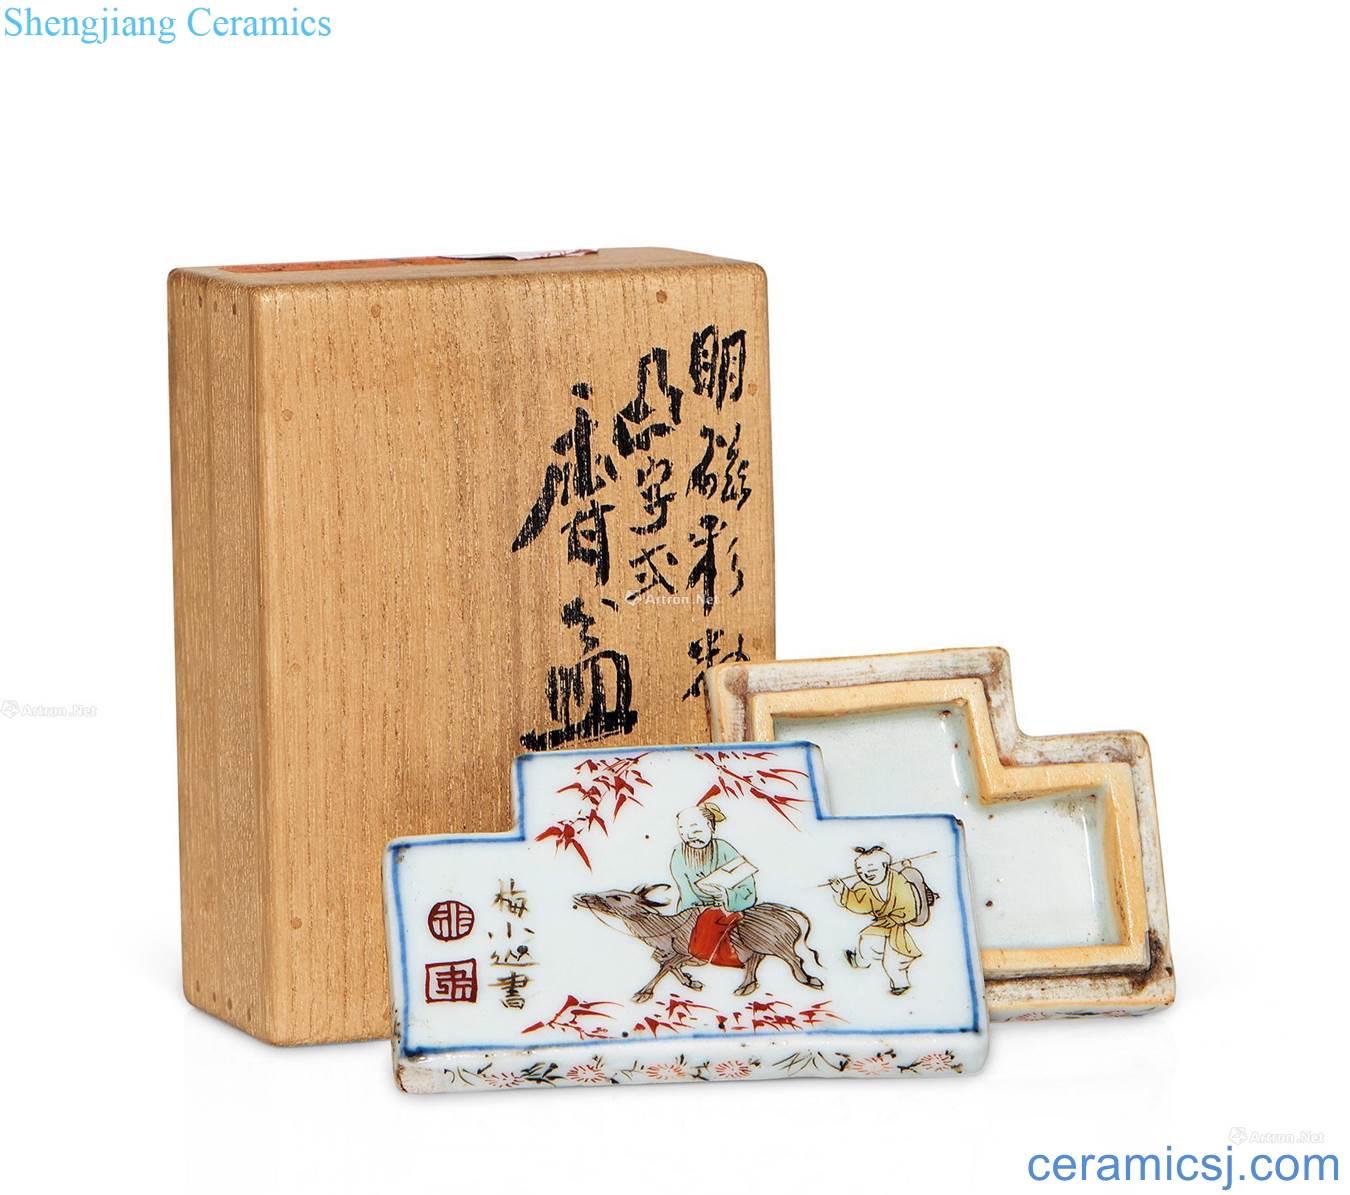 The late Ming dynasty Lao tze through convex type fragrance box